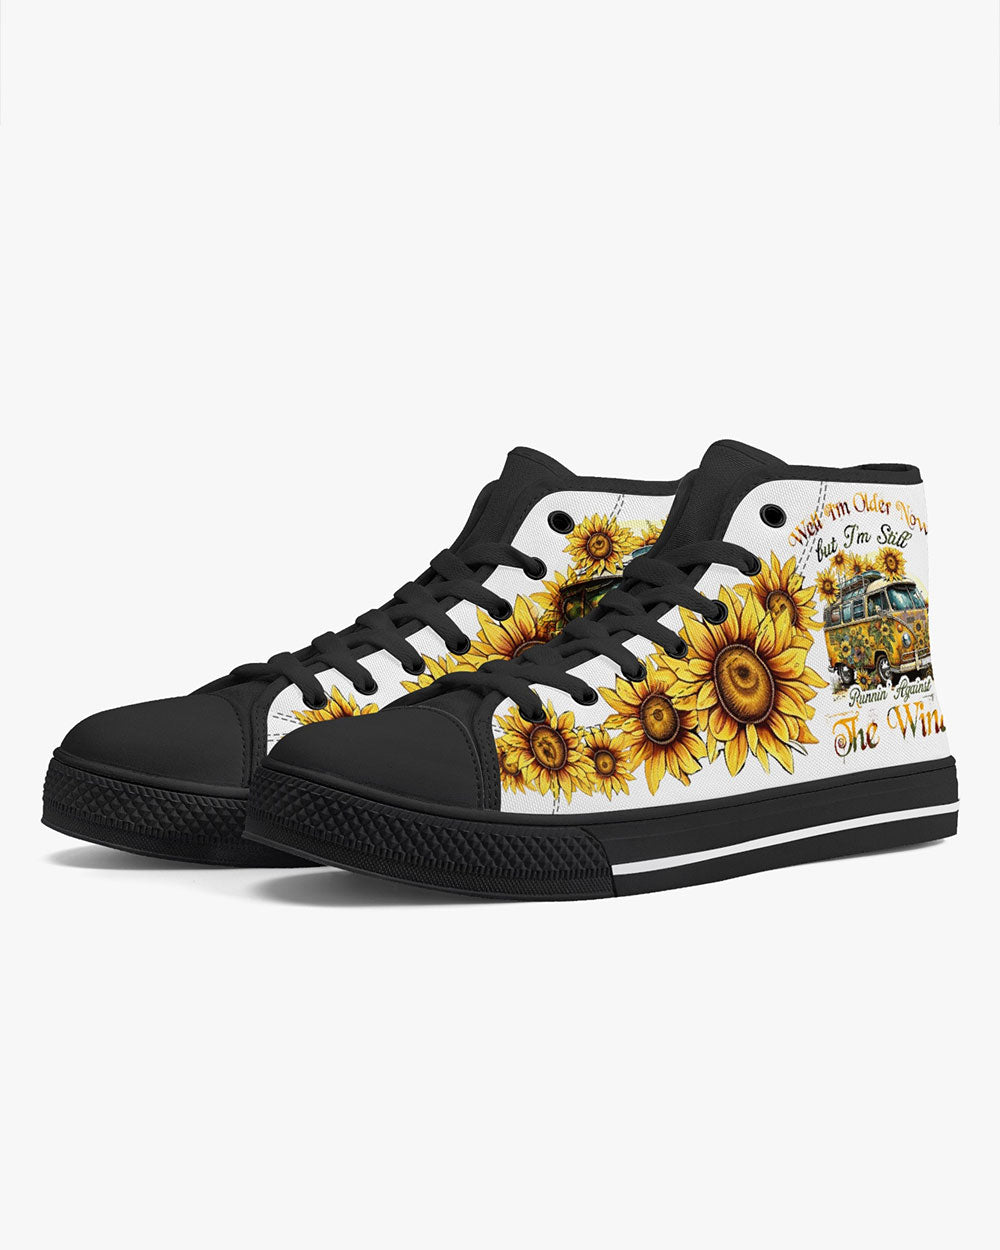 RUNNING AGAINST THE WIND HIGH TOP CANVAS SHOES - TYTD0805233